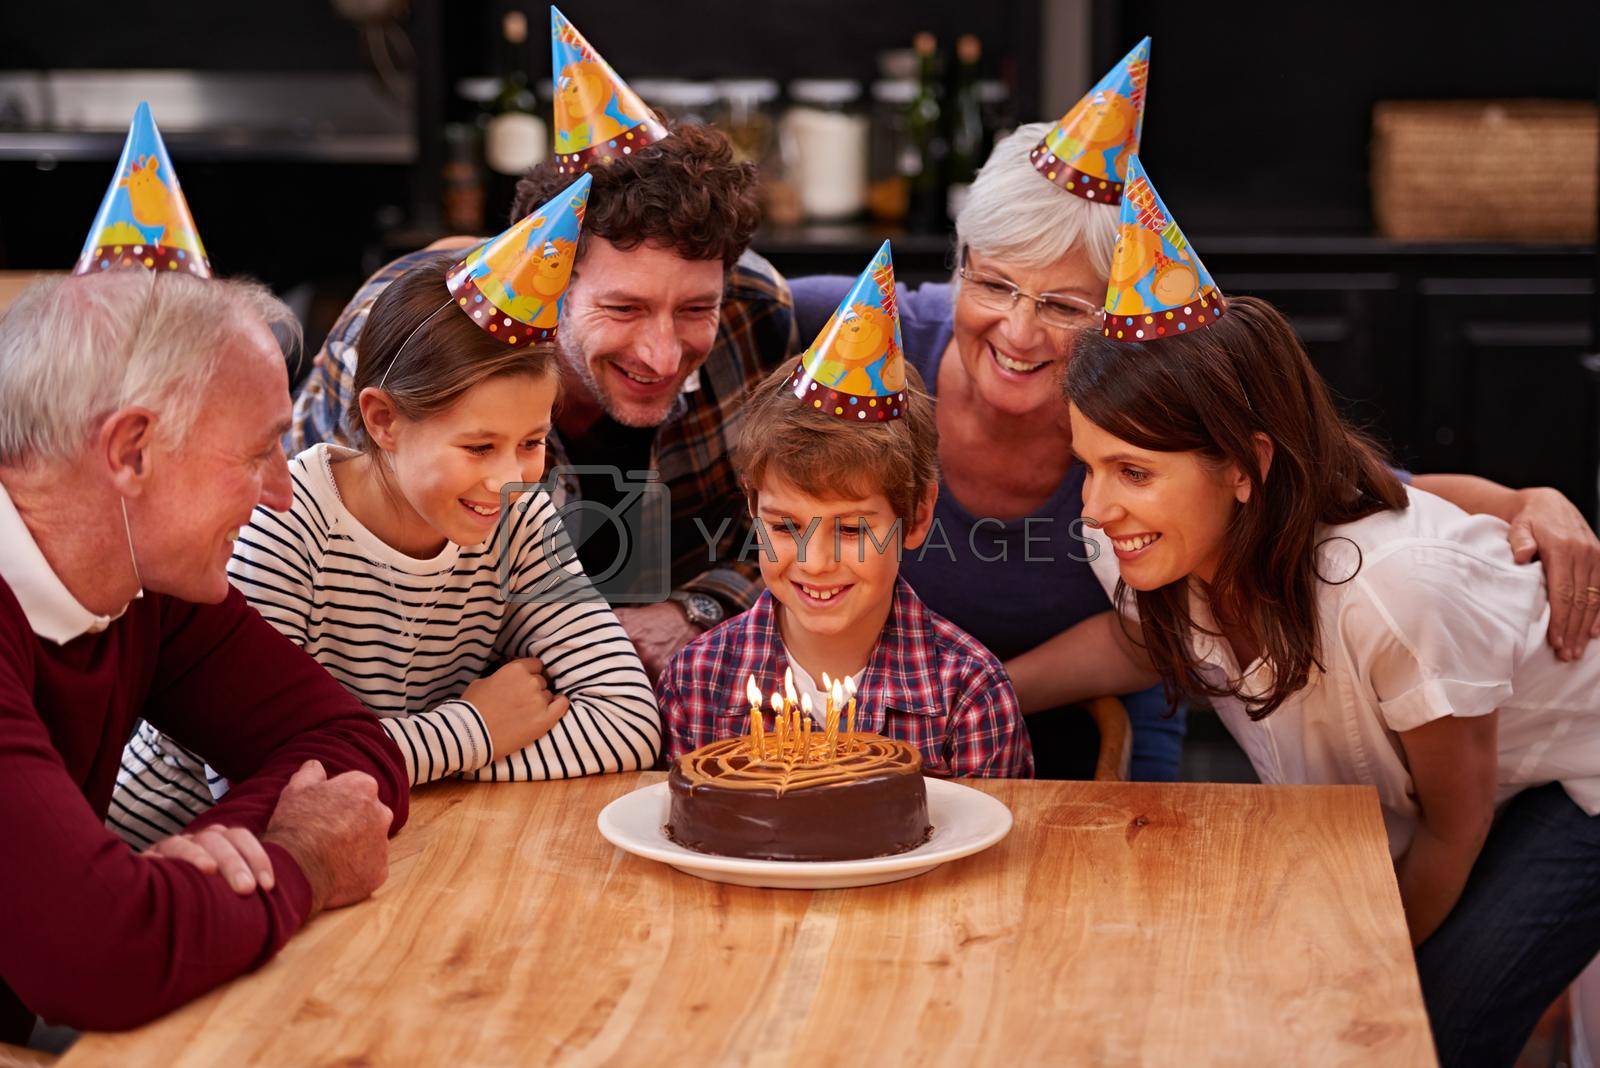 Shot of a happy young boy celebrating his birthday with his family.